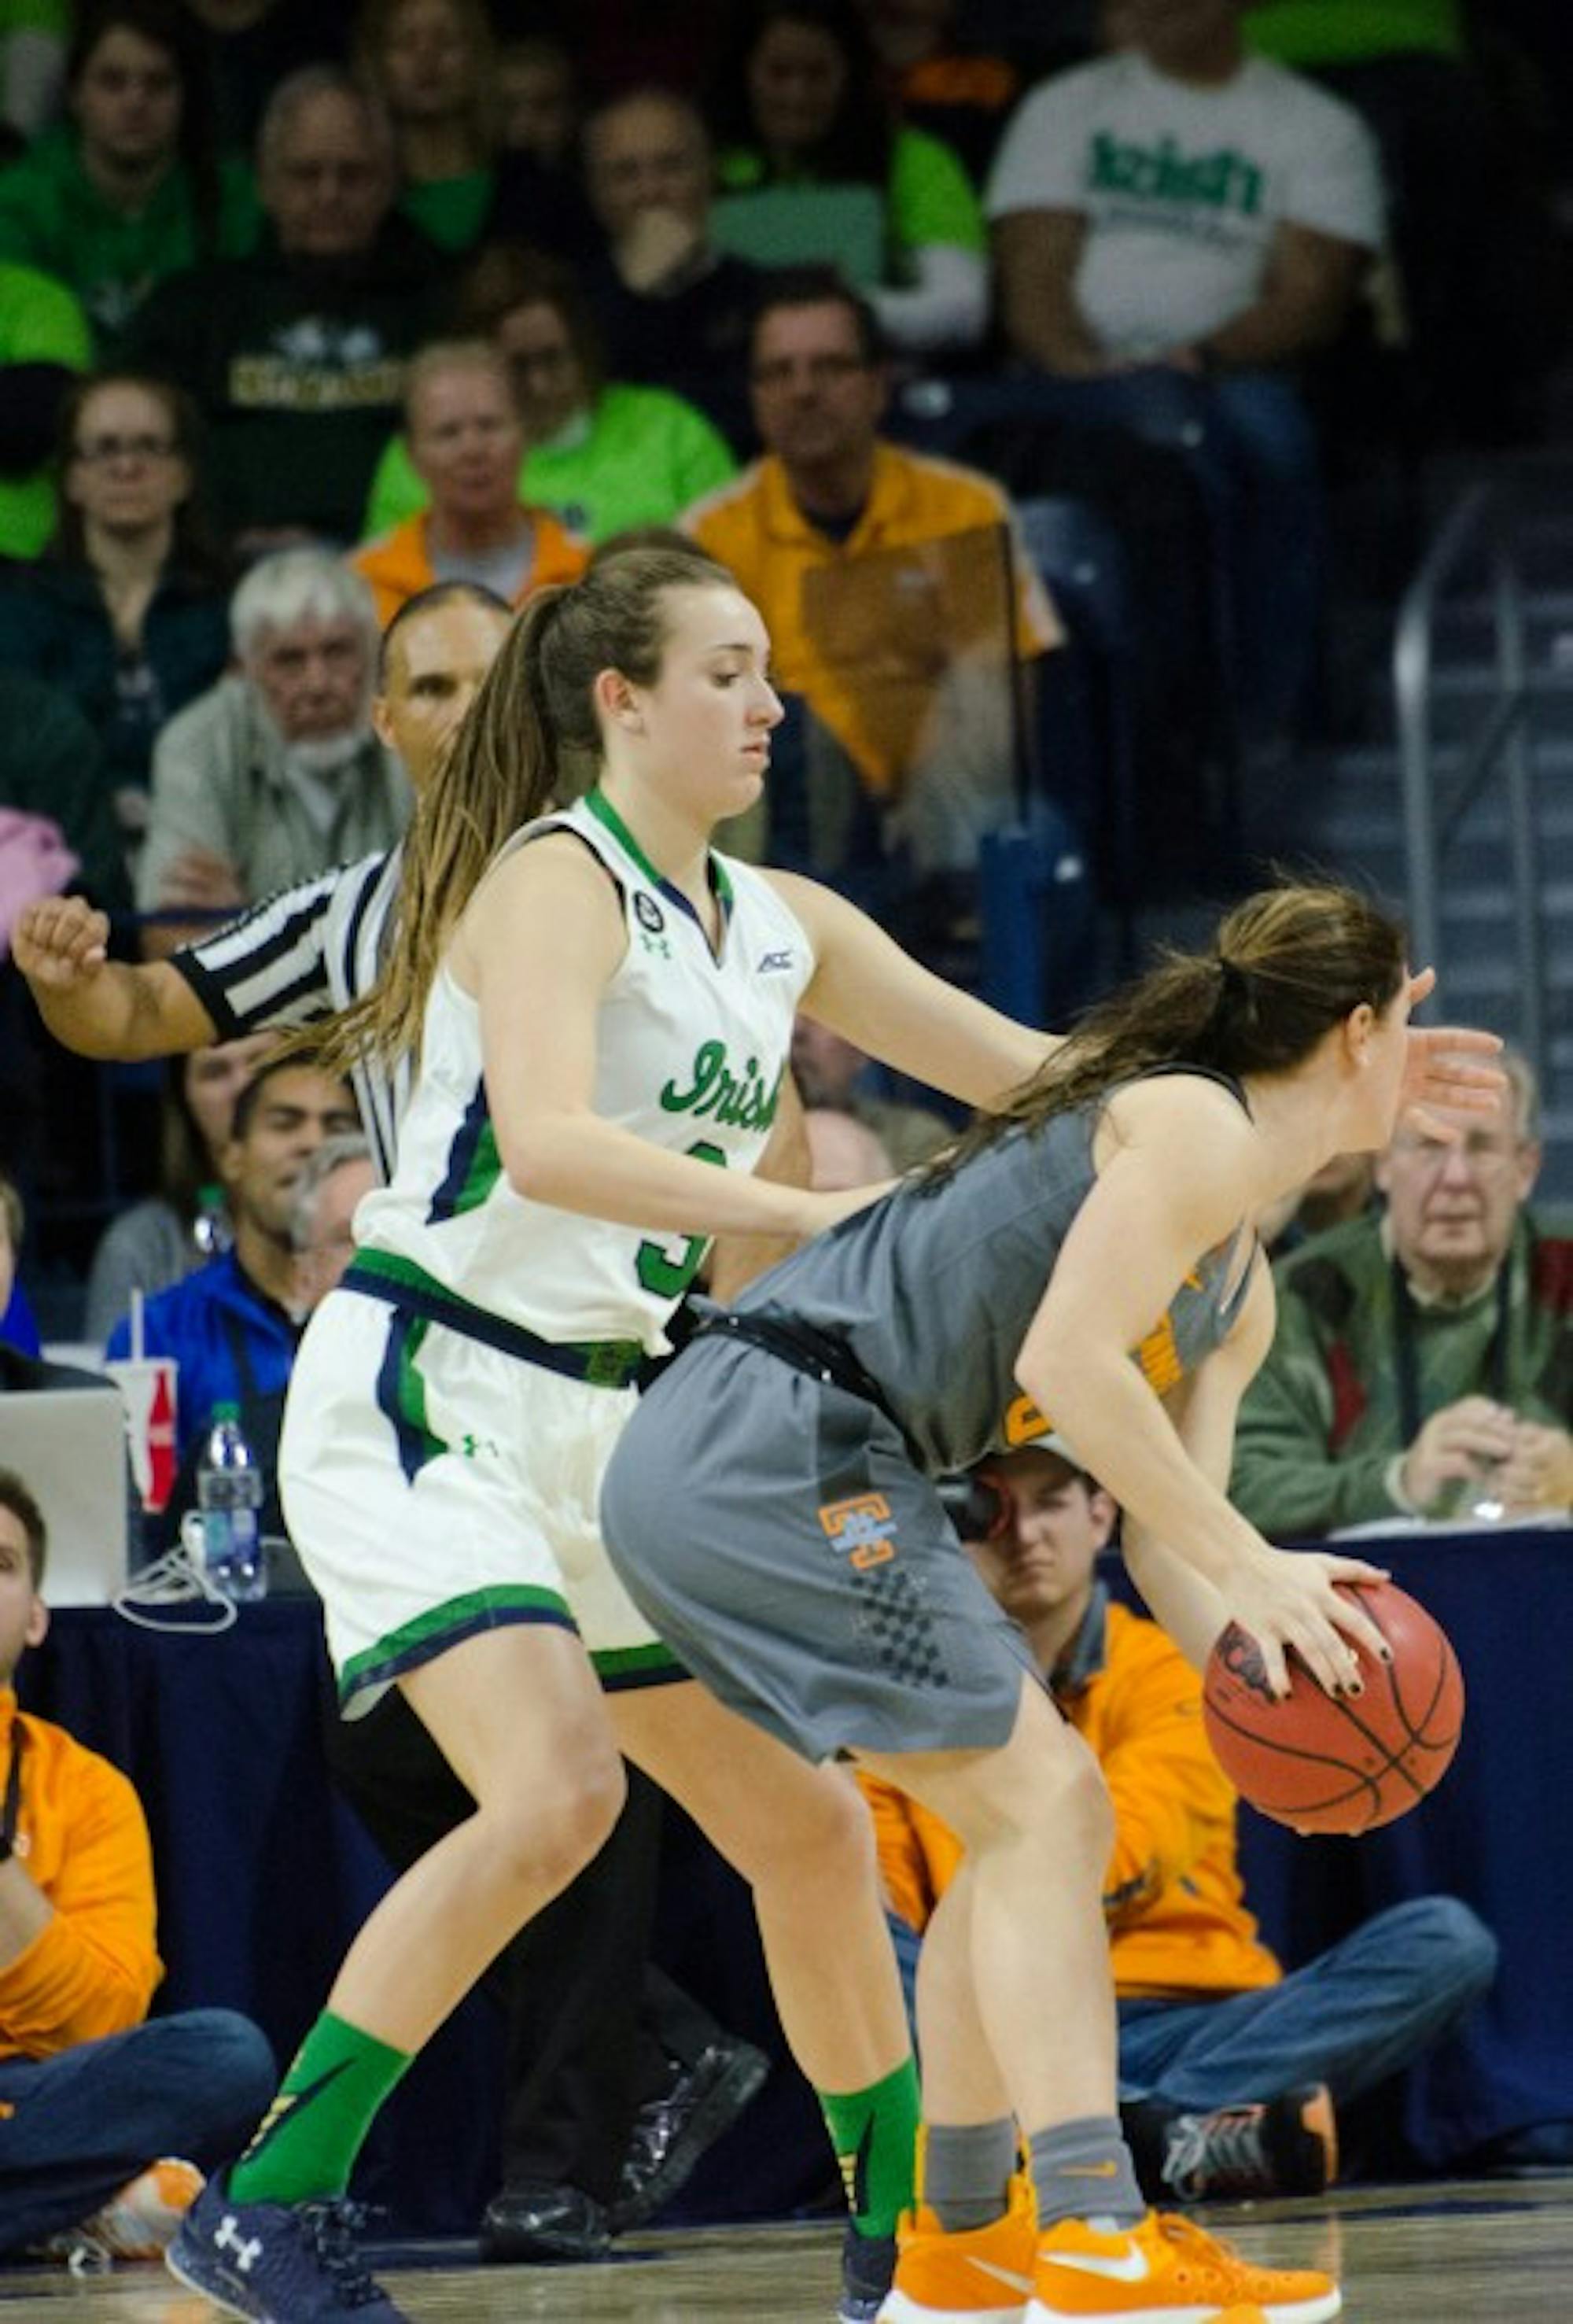 Irish freshman guard Marina Mabrey plays defense during Notre Dame’s 79-66 win over Tennessee on Jan. 18 at Purcell Pavilion. Mabrey is shooting 48.9 percent from beyond the 3-point line this season.